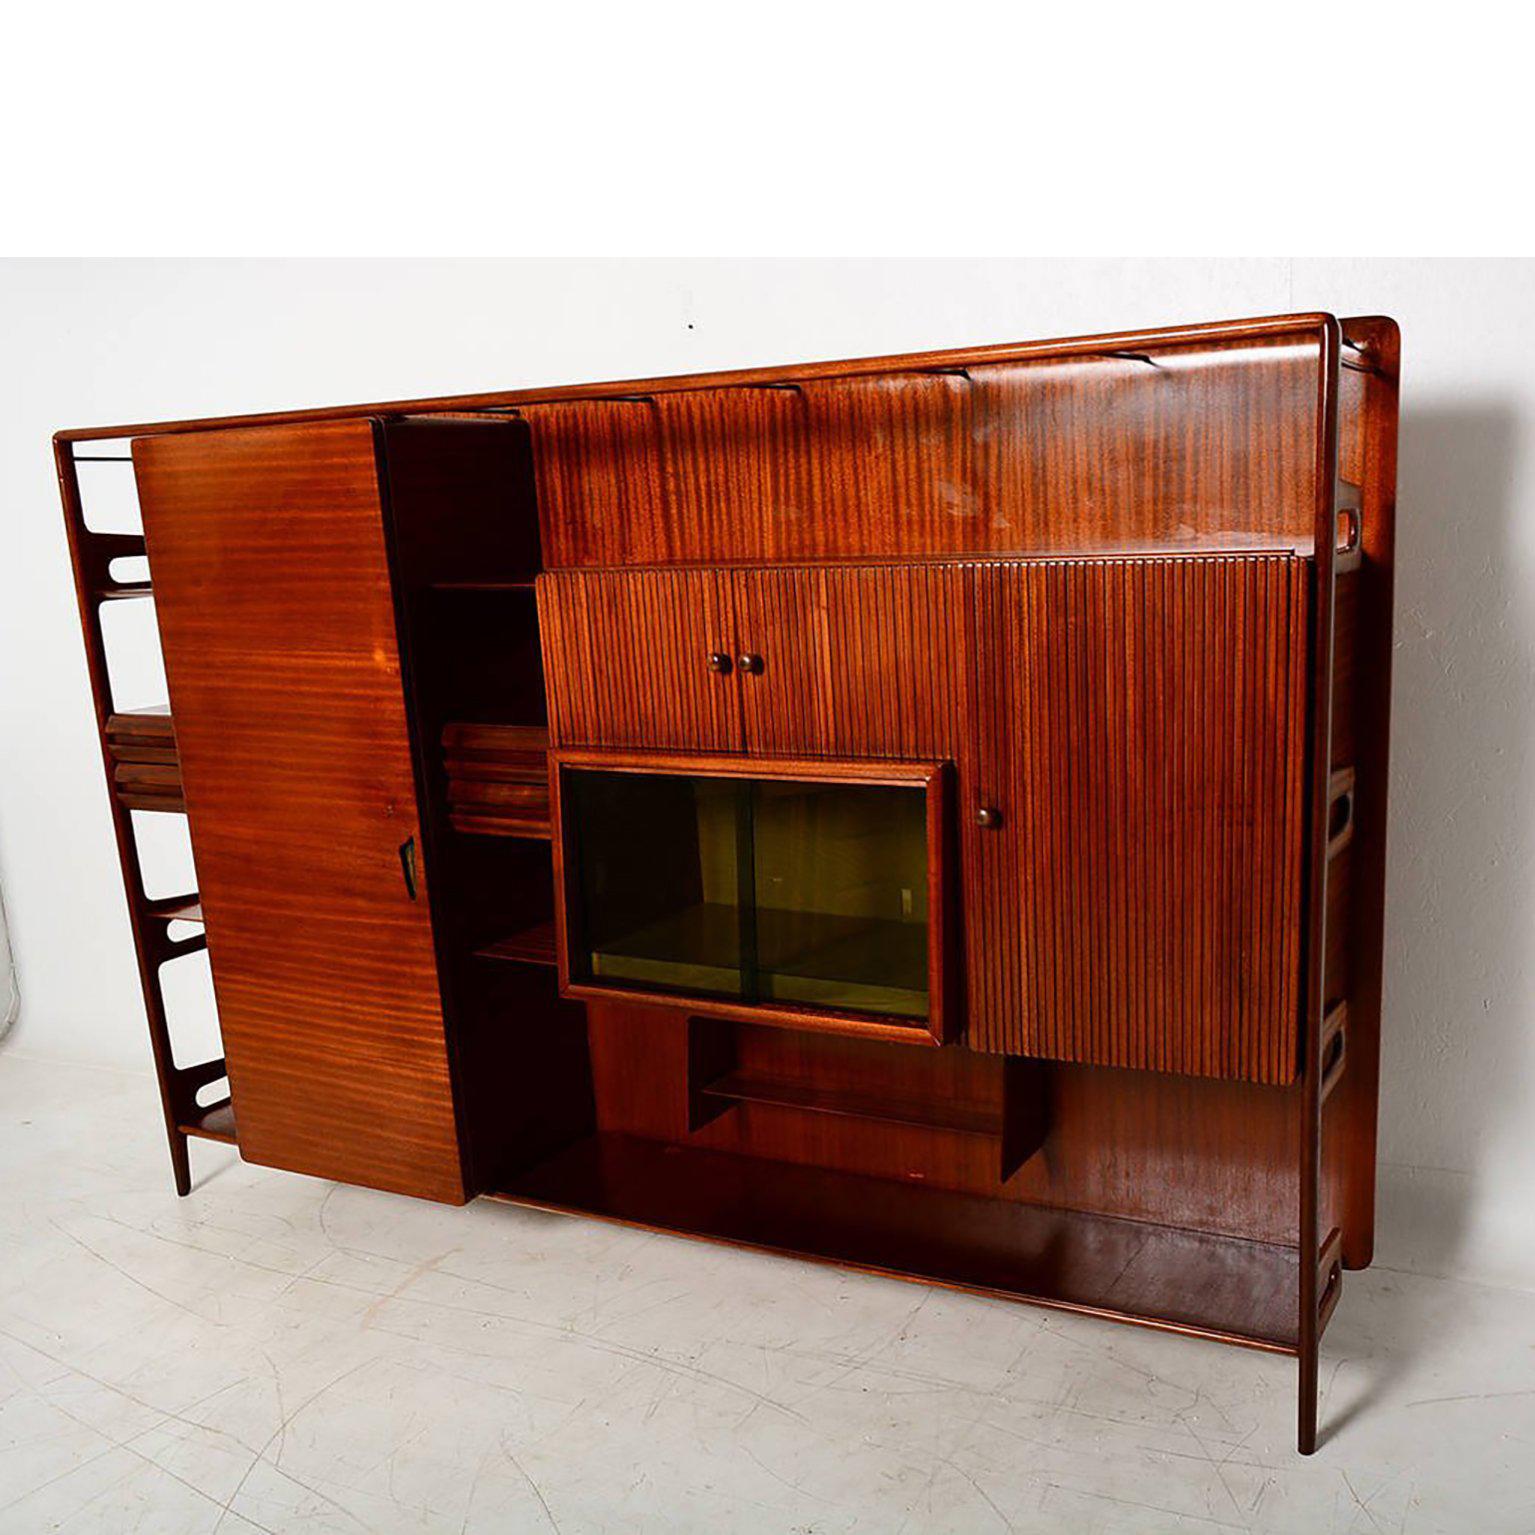 For your consideration a vintage wall unit constructed with mahogany wood.

Sculptural shape features multiple drawers, storage and open shelves.

Beautiful sculptural shapes. Unmarked.